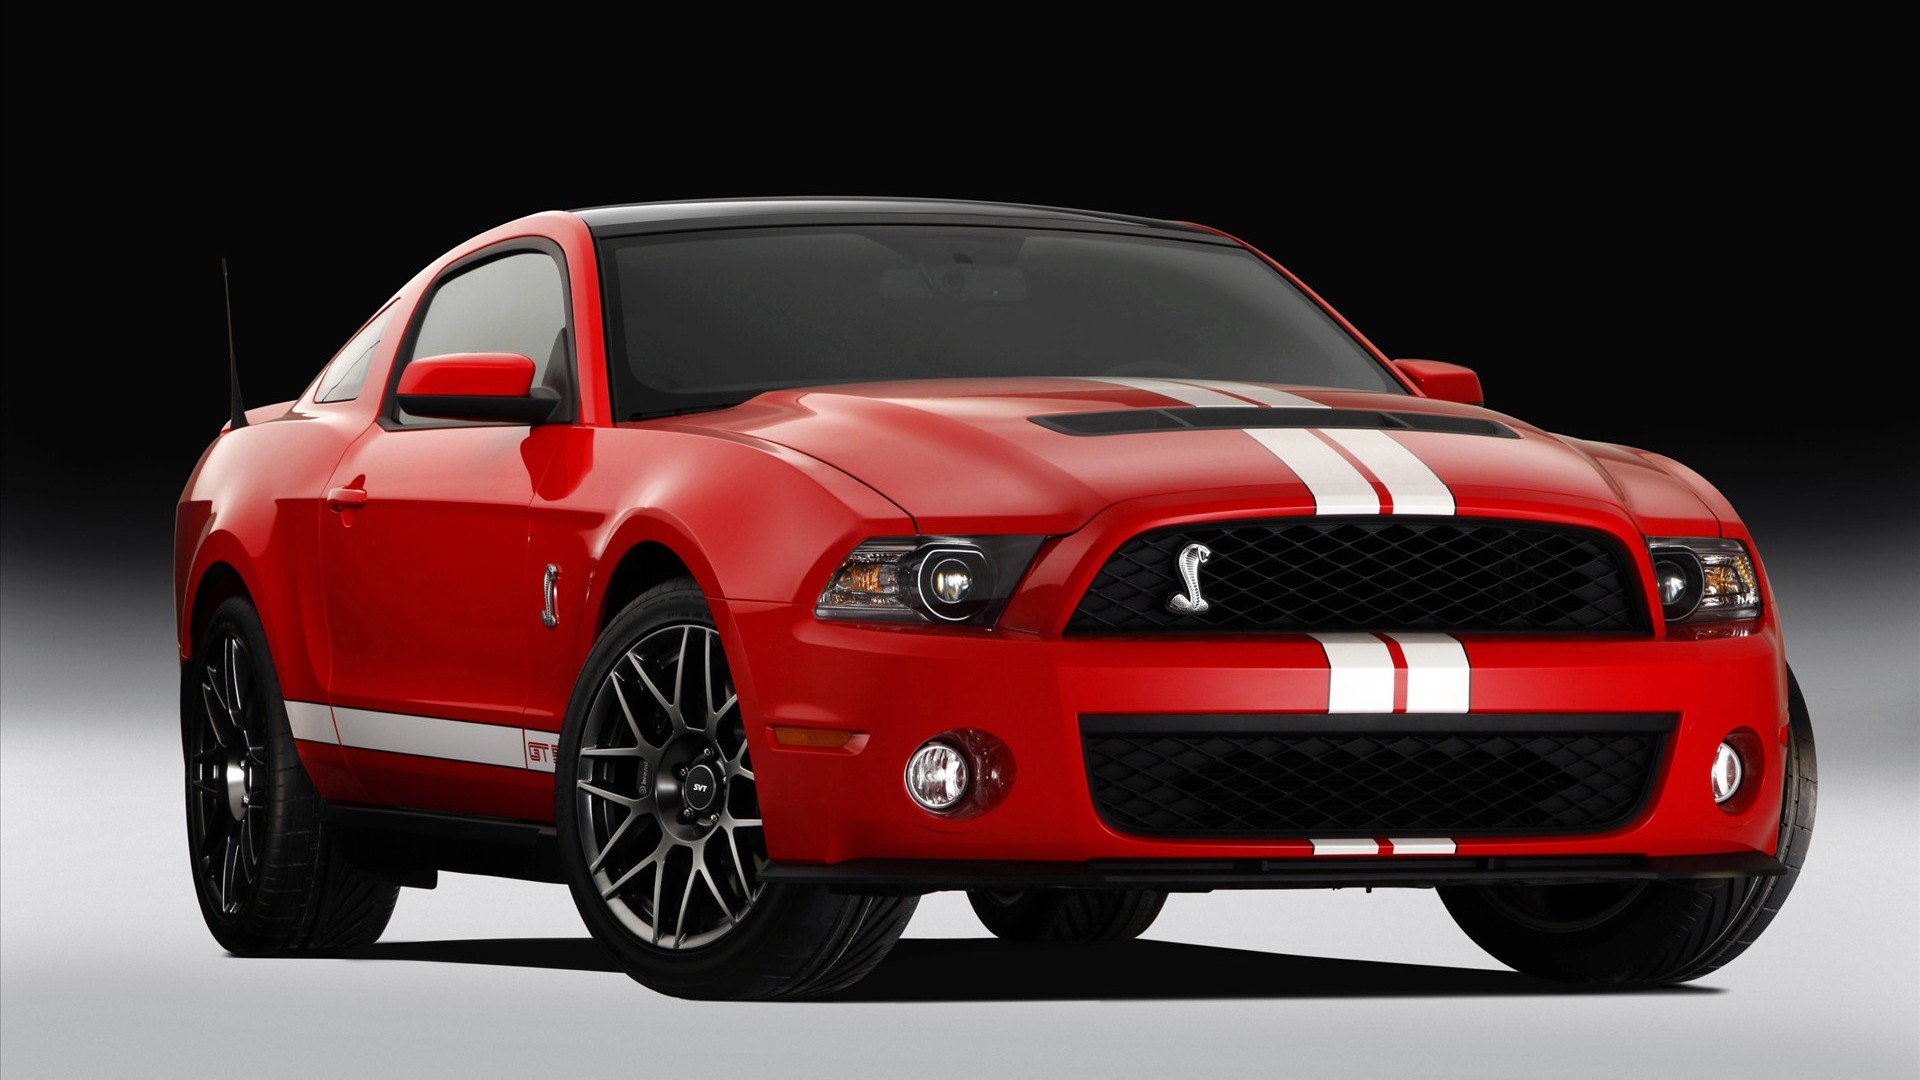 Ford Mustang GT500 Wallpapers #1 - 1920x1080